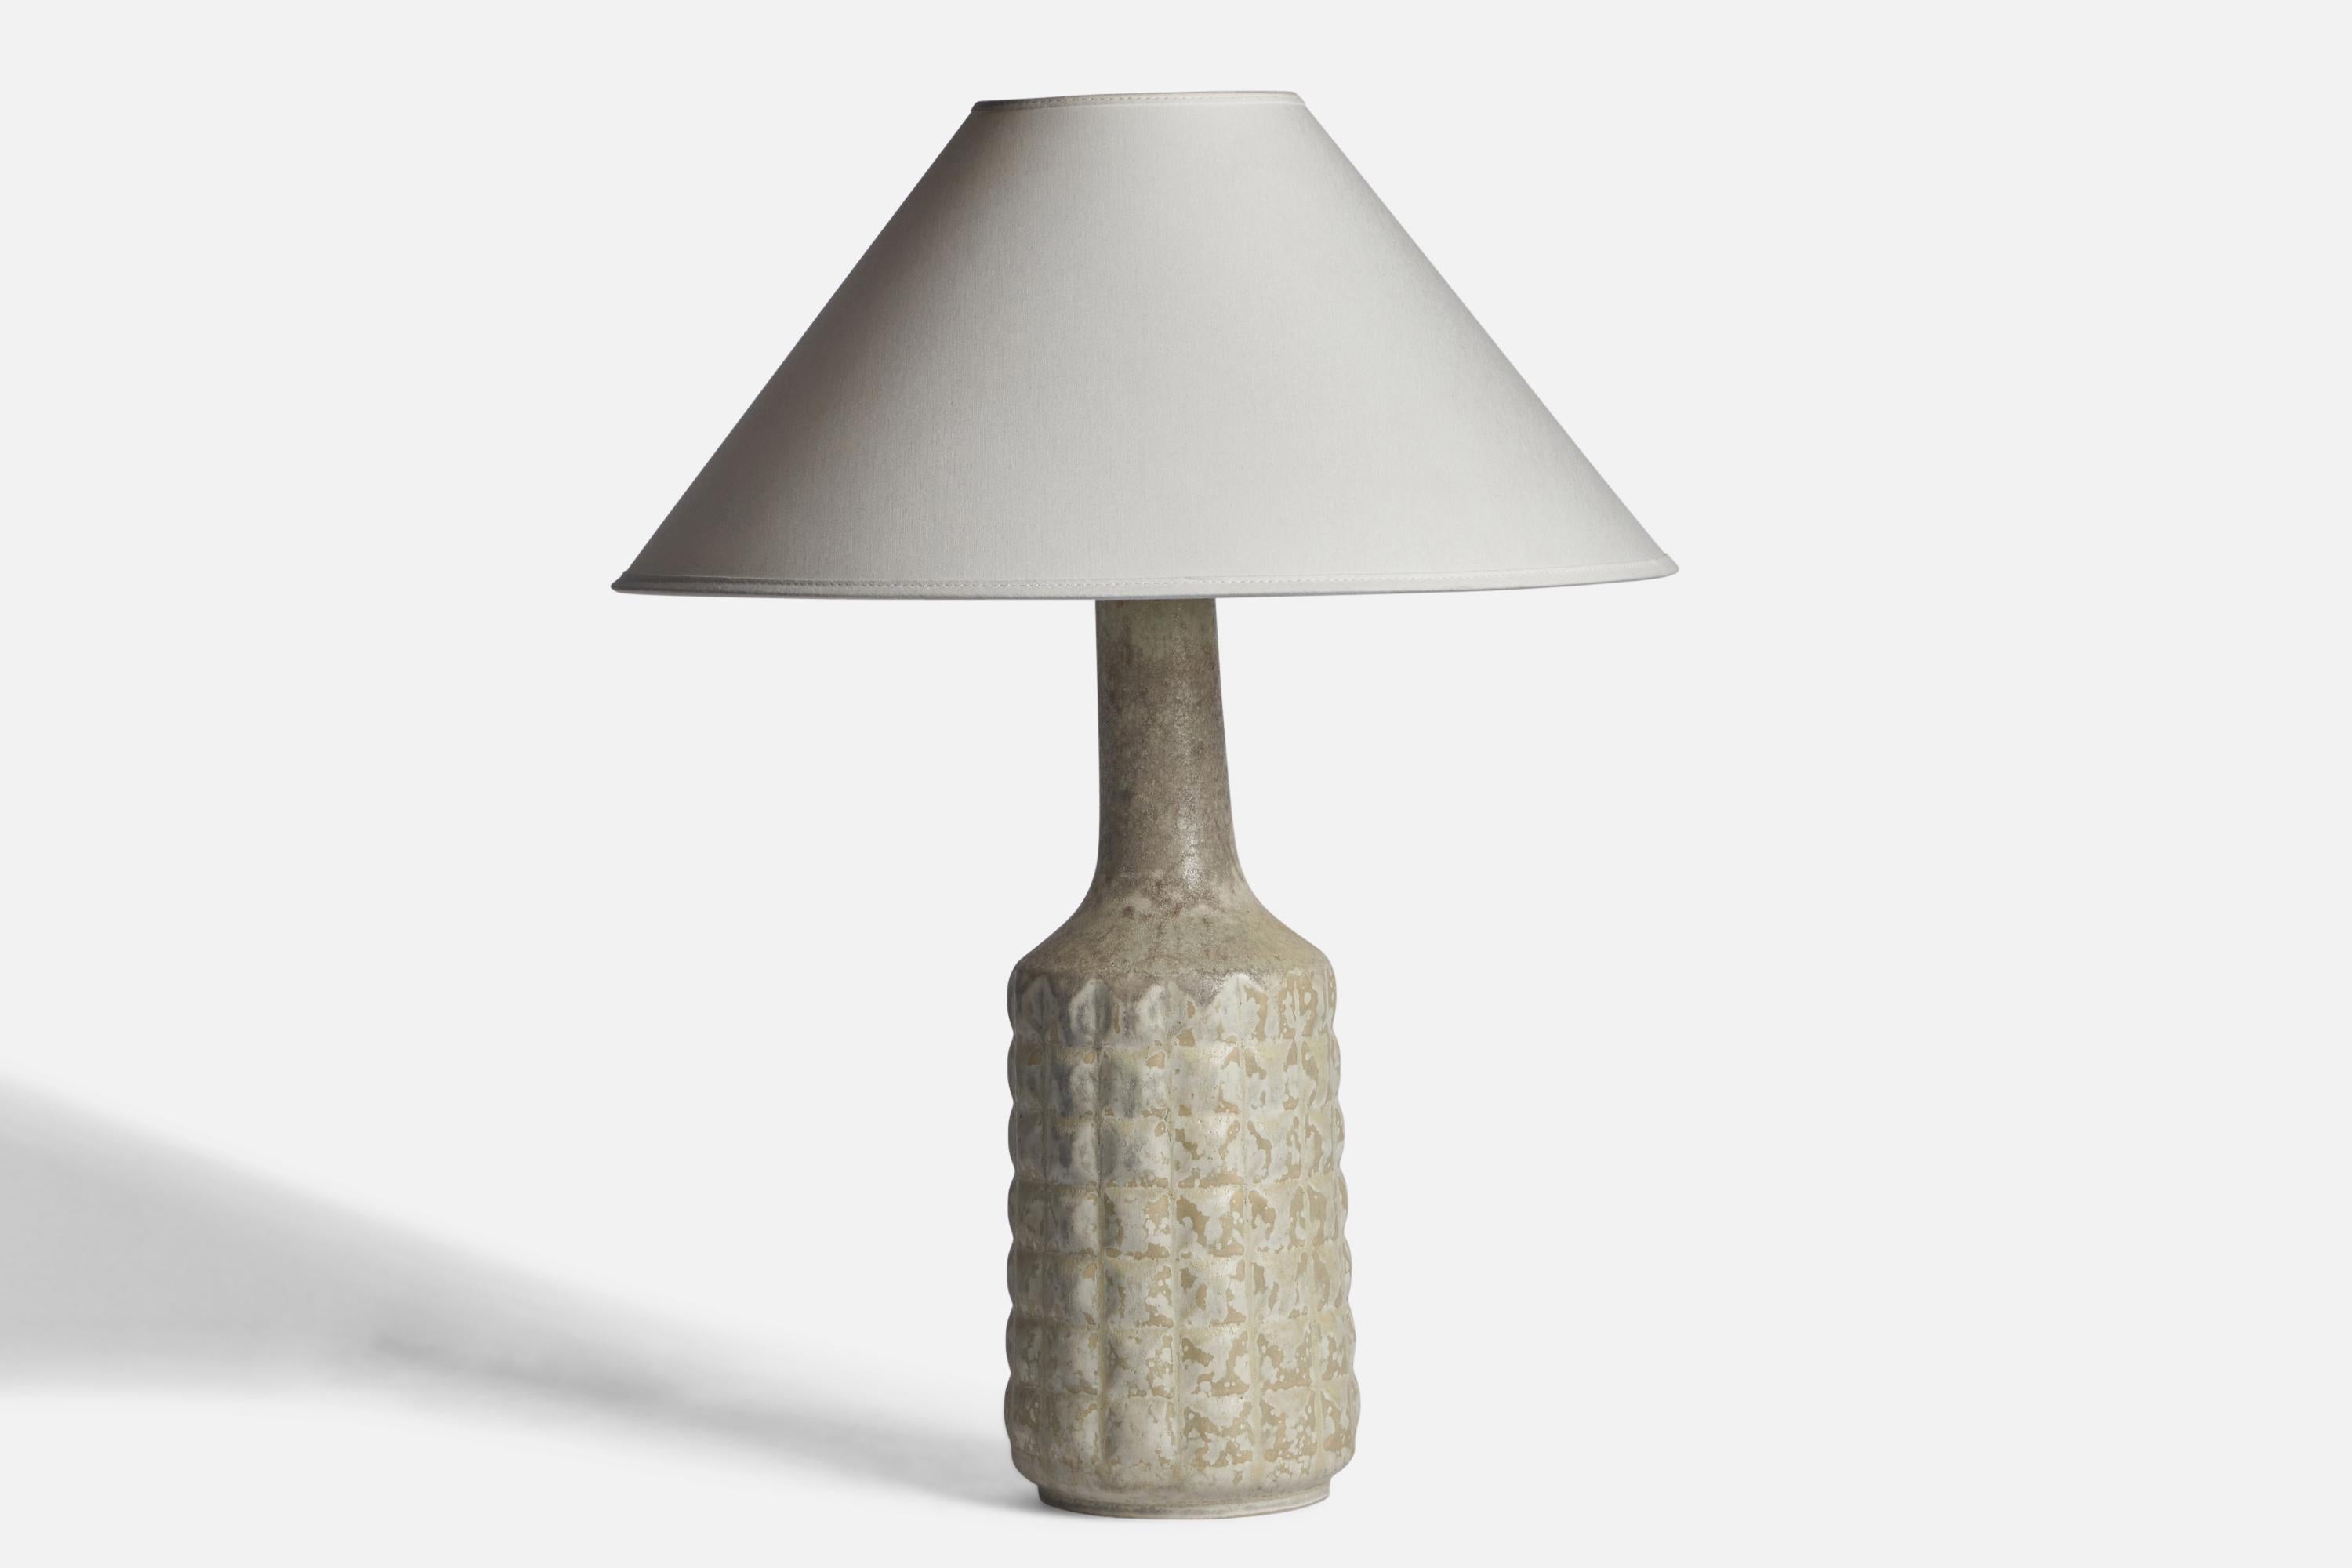 A light grey-glazed stoneware table lamp designed and produced by Desiree, Denmark, c. 1960s.

Dimensions of Lamp (inches): 16.75 H x 5.25” Diameter
Dimensions of Shade (inches): 4.5” Top Diameter x 16” Bottom Diameter x 7.25” H
Dimensions of Lamp